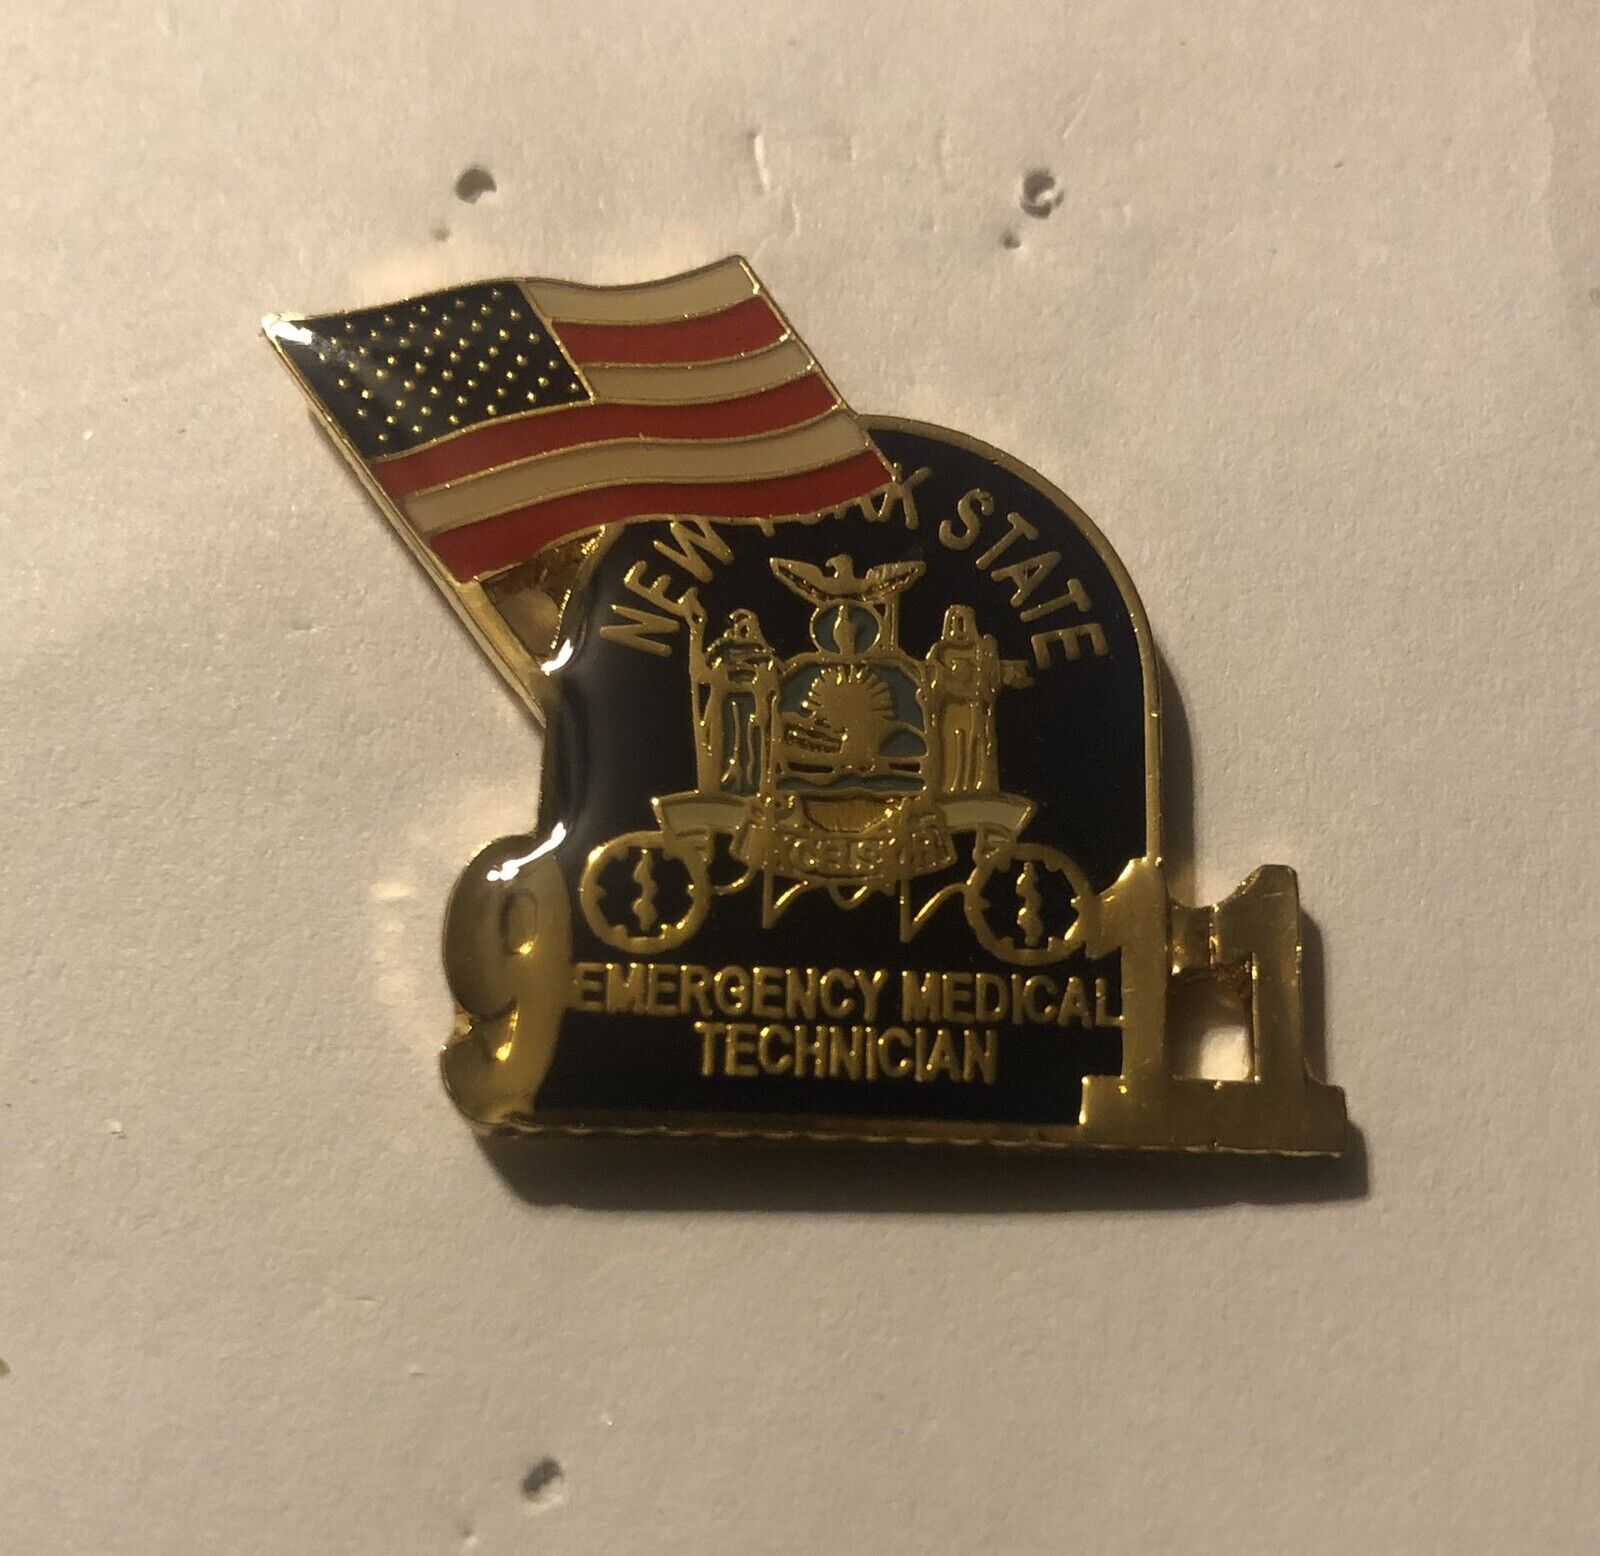 9/11/01 NEW YORK STATE EMERGENCY MEDICAL TECHNICIAN W/FLAG COMMEMORATIVE PIN